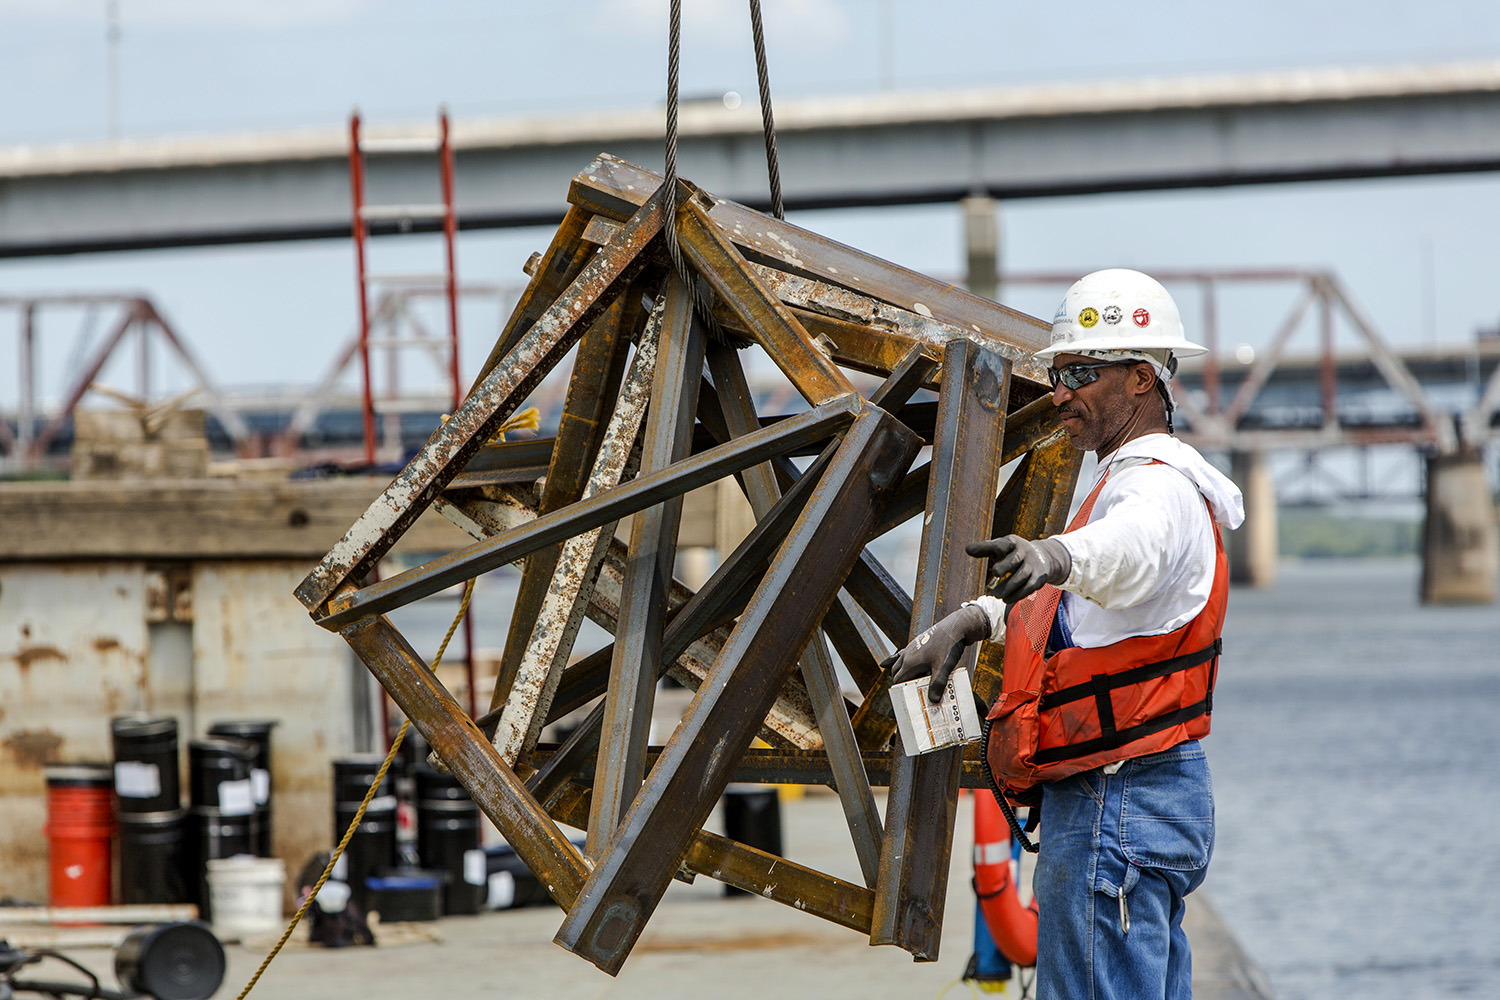  Karen E. Segrave | KES Photo

A worker with Kansas City-based Massman Construction Co., flags the crane while working on the new Broadway Bridge. The Broadway Bridge has been under construction for the last 18 months by Kansas City-based Massman Con